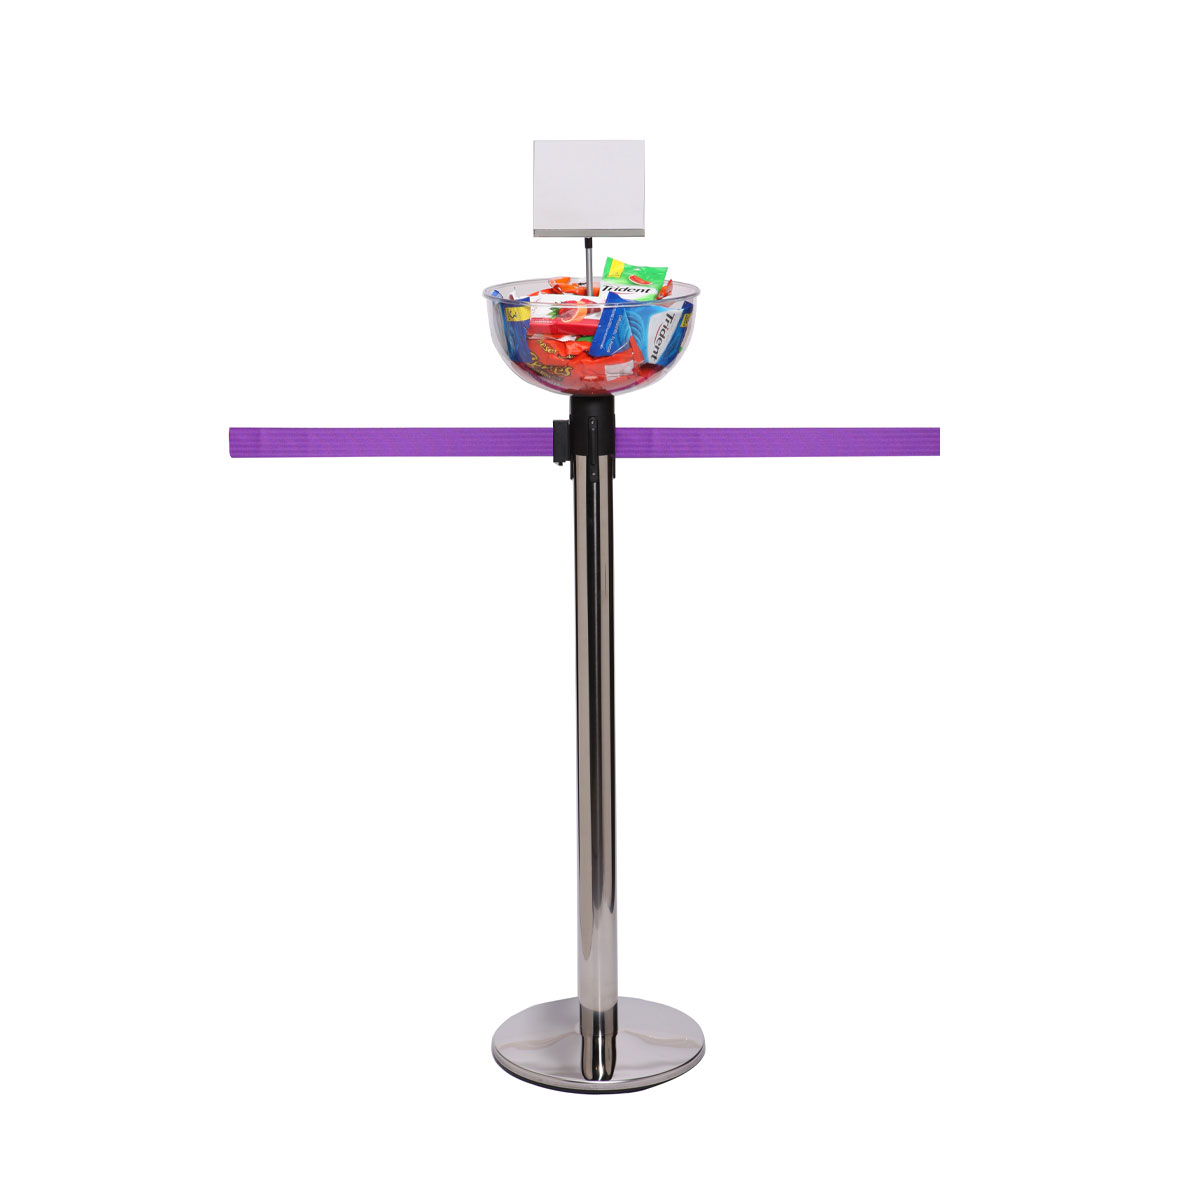 Queue Barrier POS Display Bowl for In-Queue Merchandising. Clear Bowl for Displaying Small Products. Universal Adaptor Fits Most Major Barrier Brands.